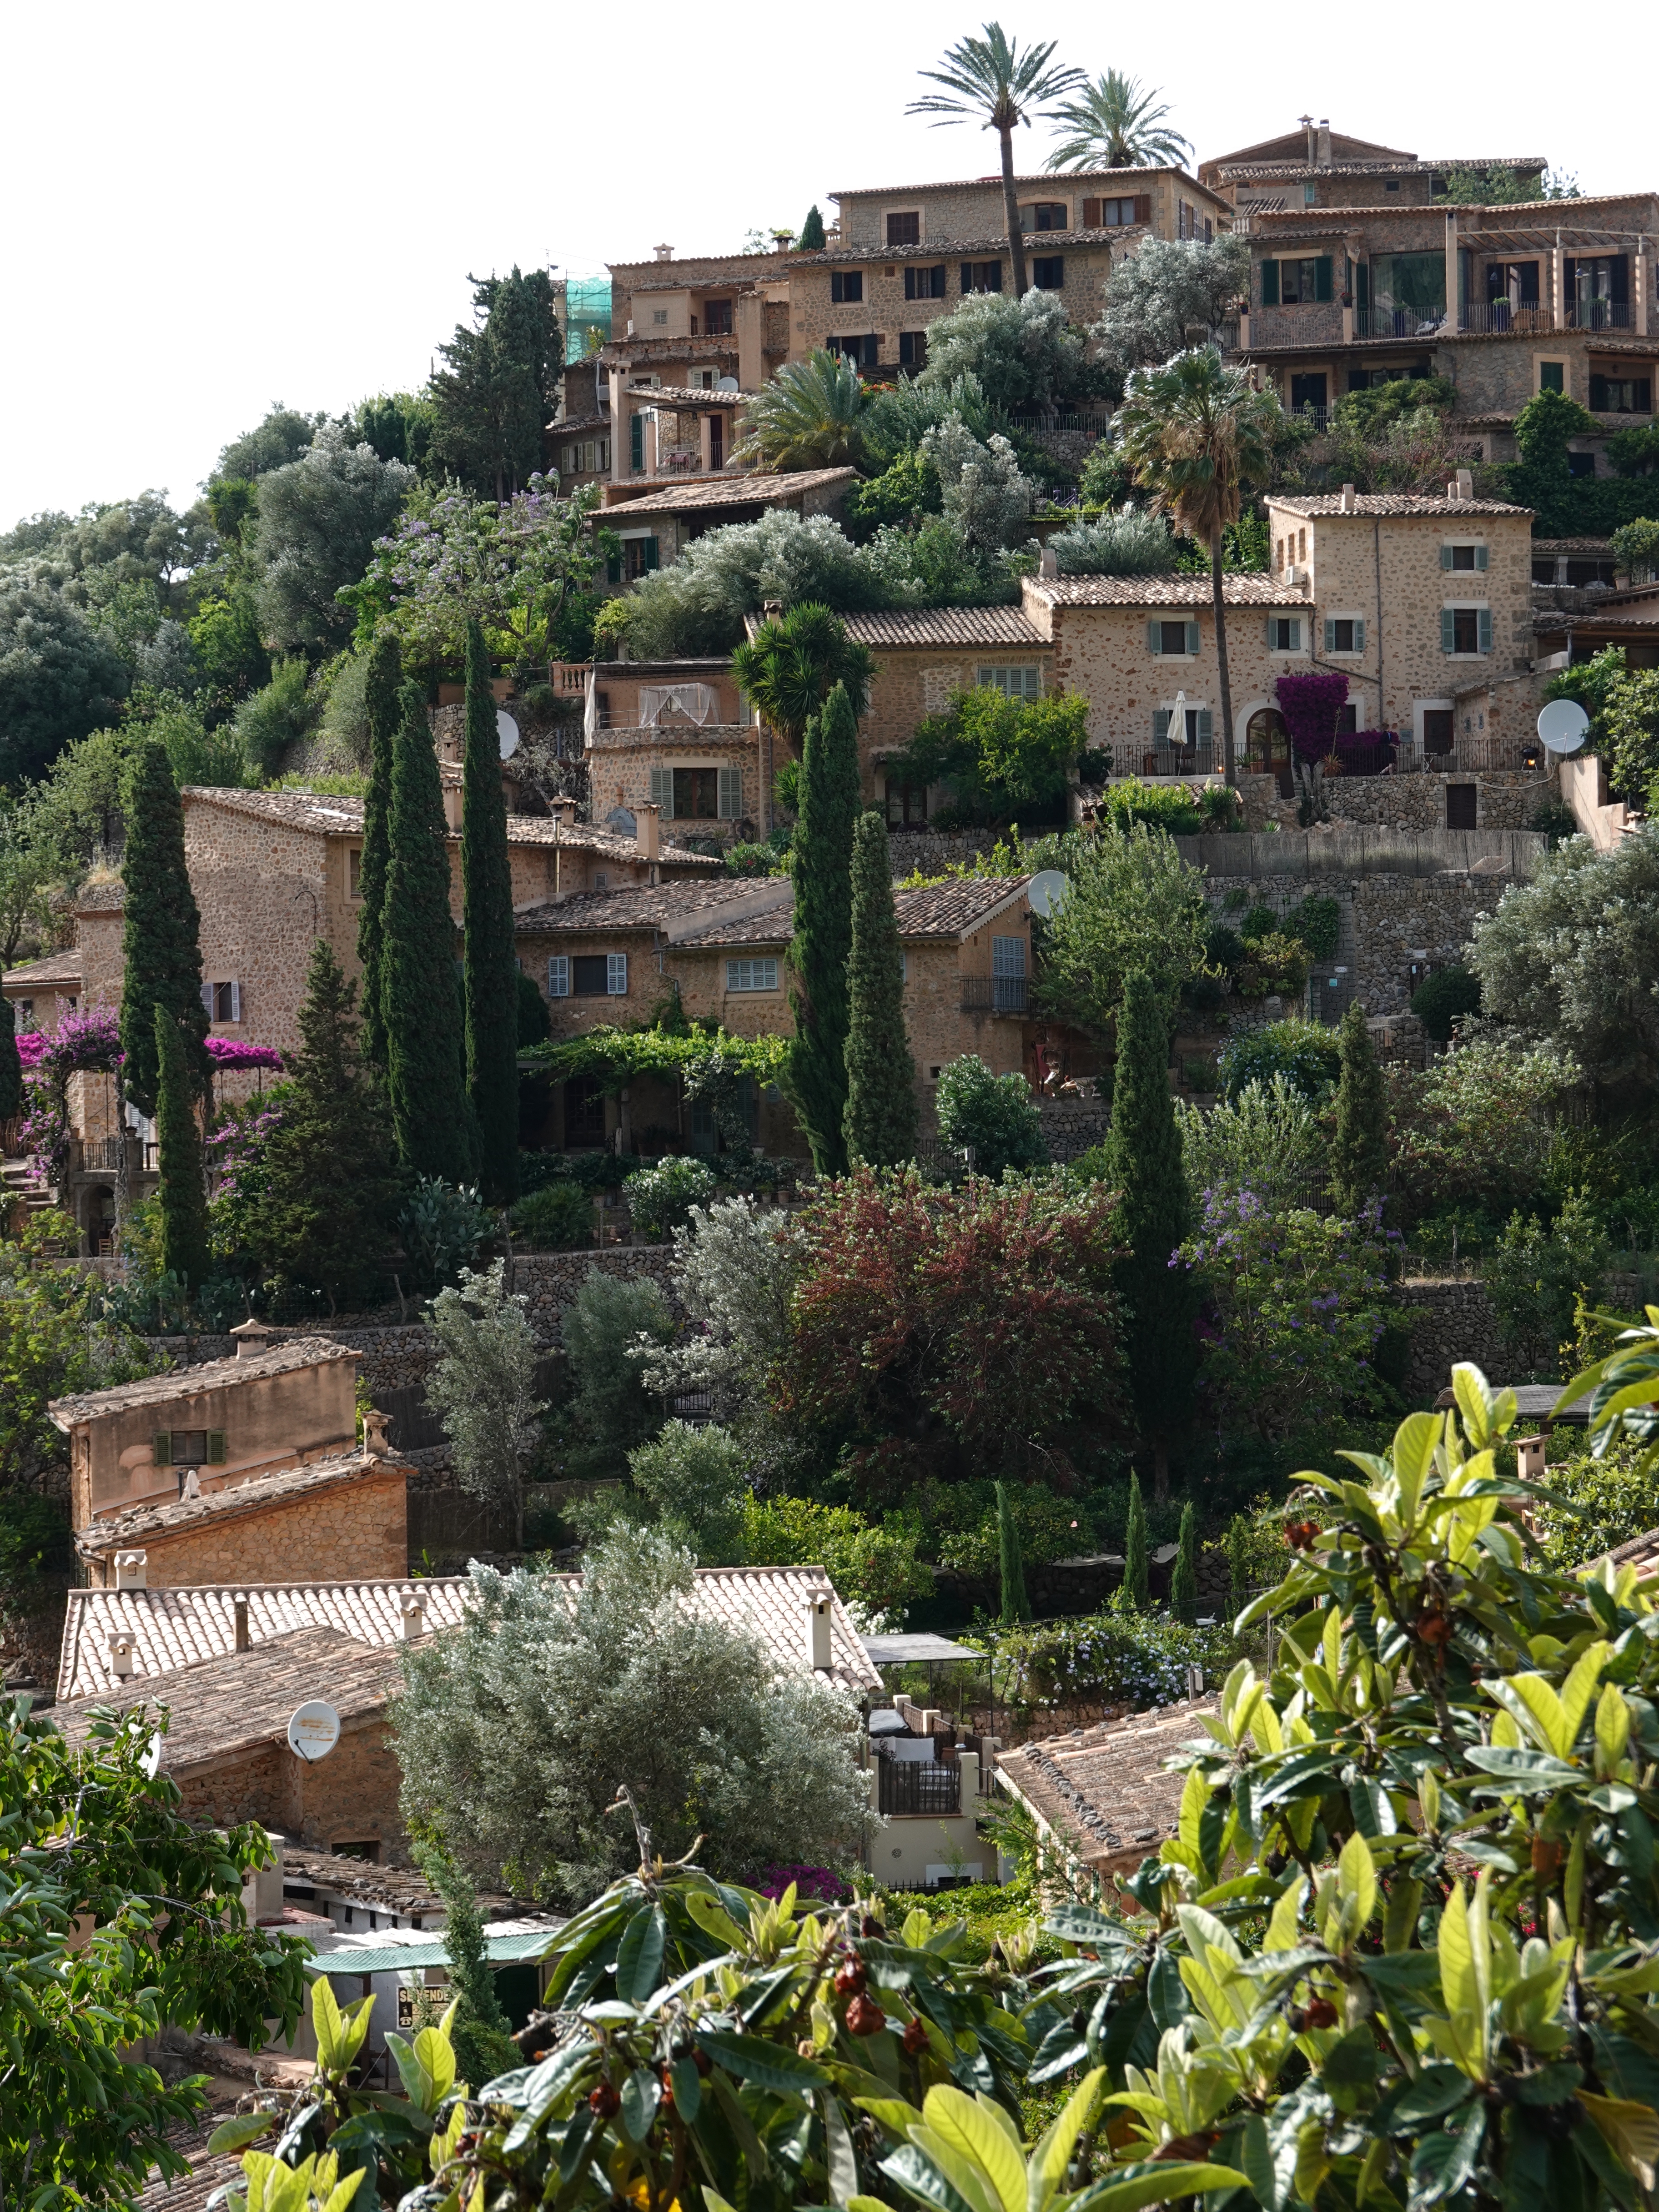 The combination of the location and the beautiful architecture ad the food scene make Deia the most beautiful village in Mallorca